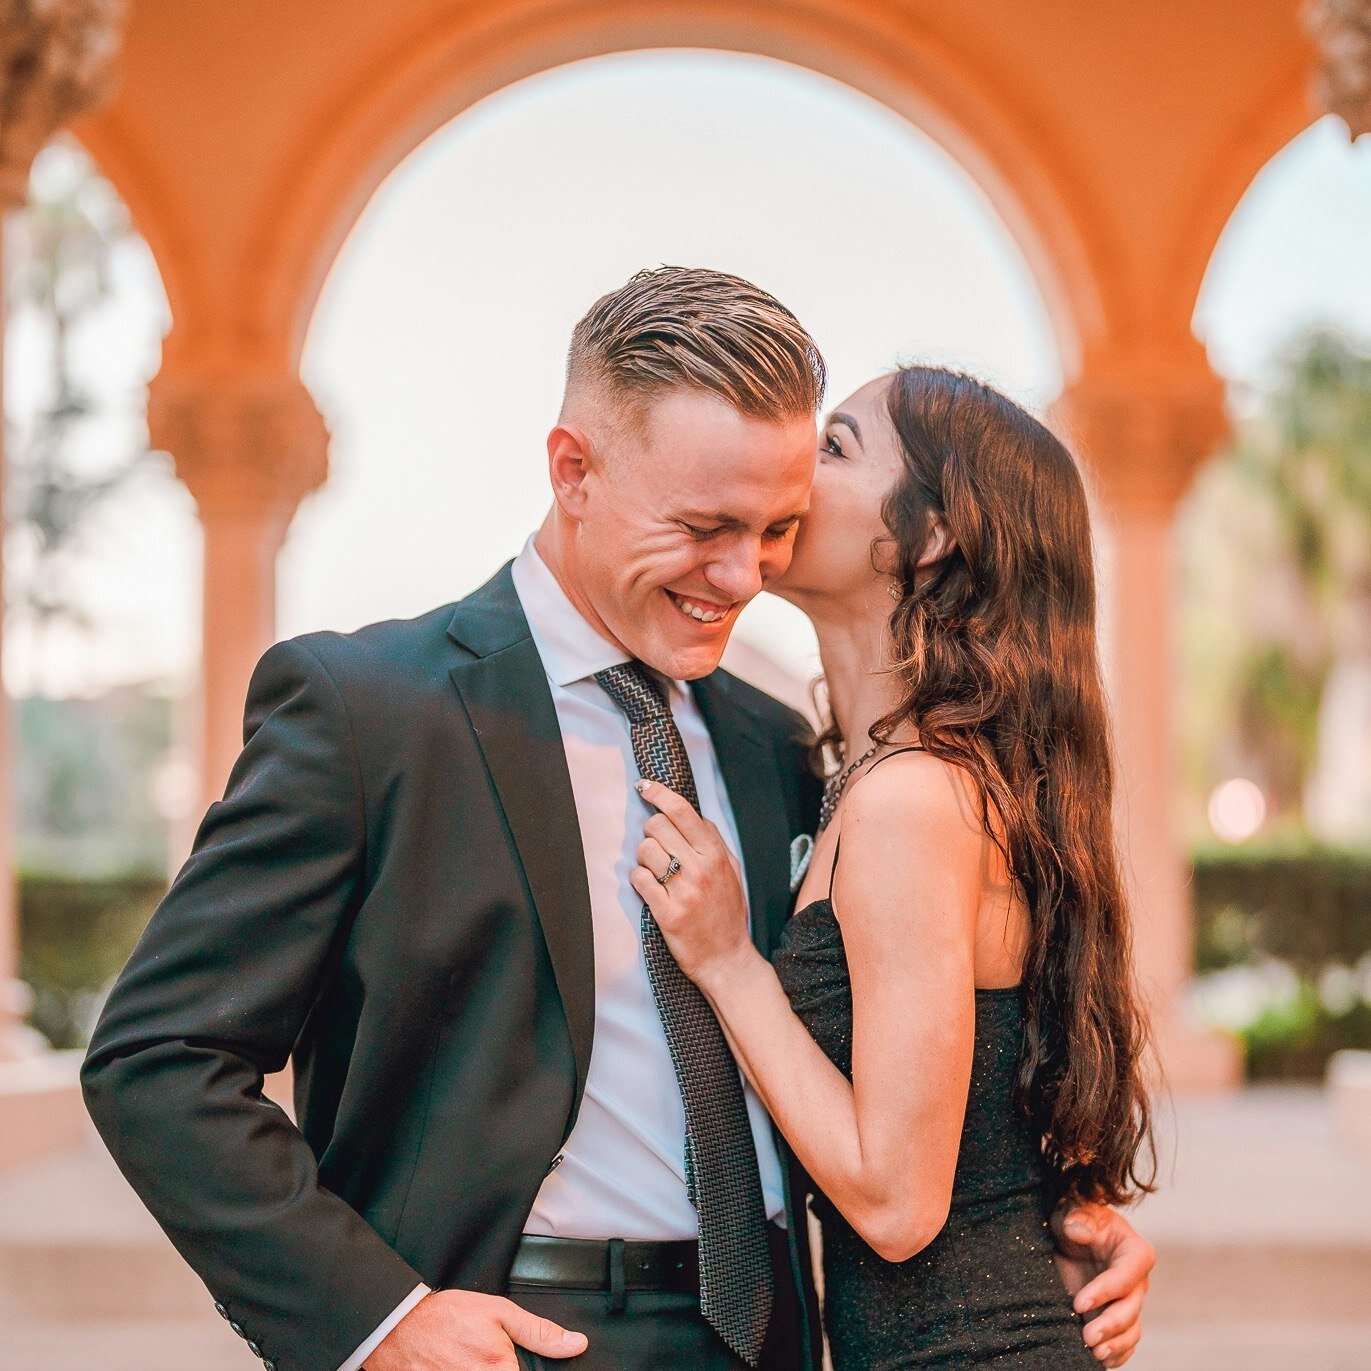 Matt + Jordyn's unforgettable proposal story unfolded against the backdrop of Balboa Park. We seized the moment on a bridge, capturing the essence of their love. Swipe left for the journey through stunning spots and a timeless 'Yes.' 💑💍 #LoveStory 